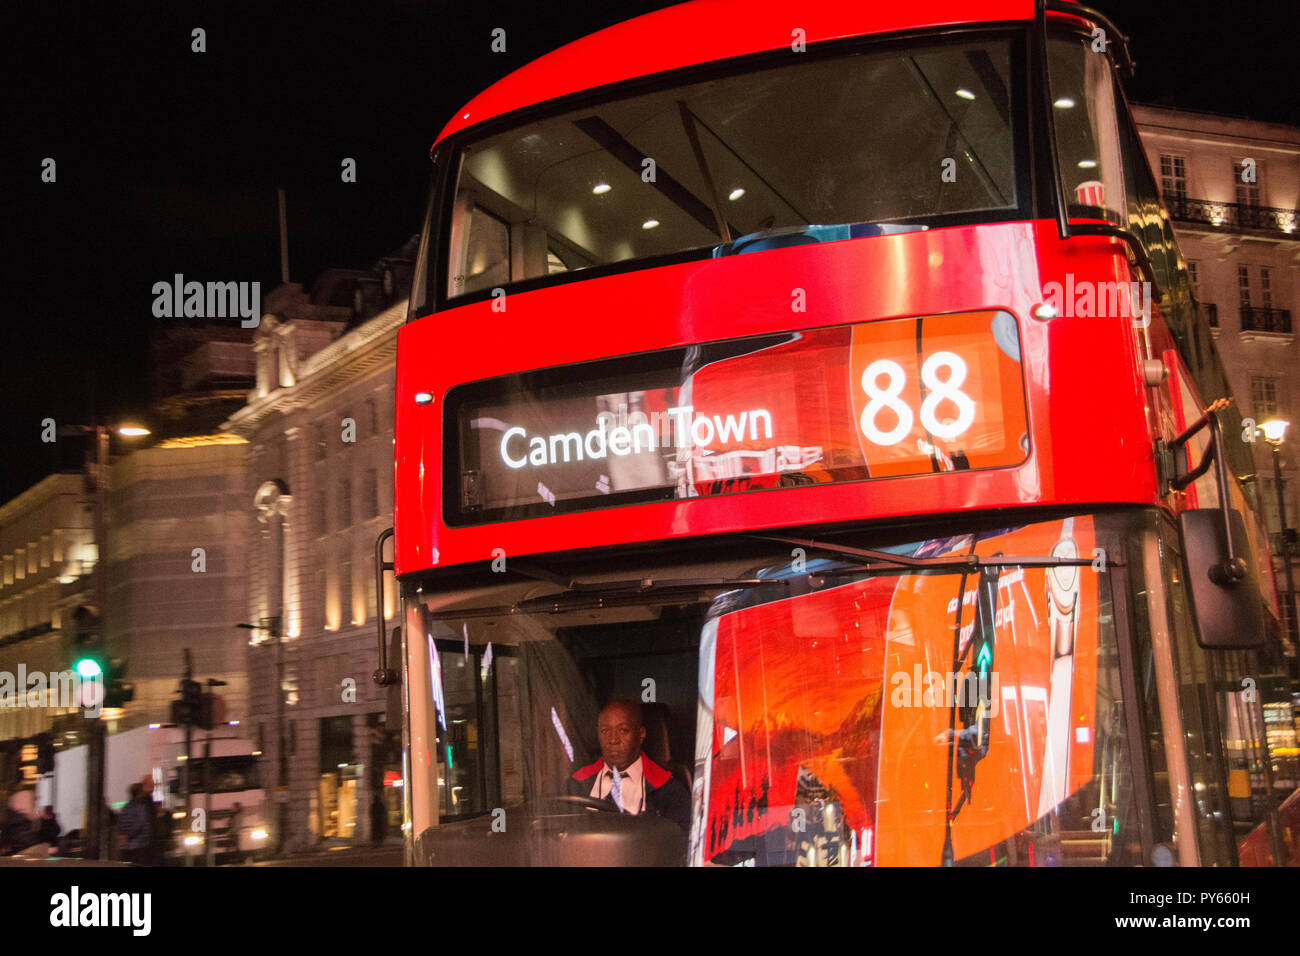 The New TFL Routmaster or New Bus (Boris buses) for London at Piccadilly Circus, London, UK Stock Photo